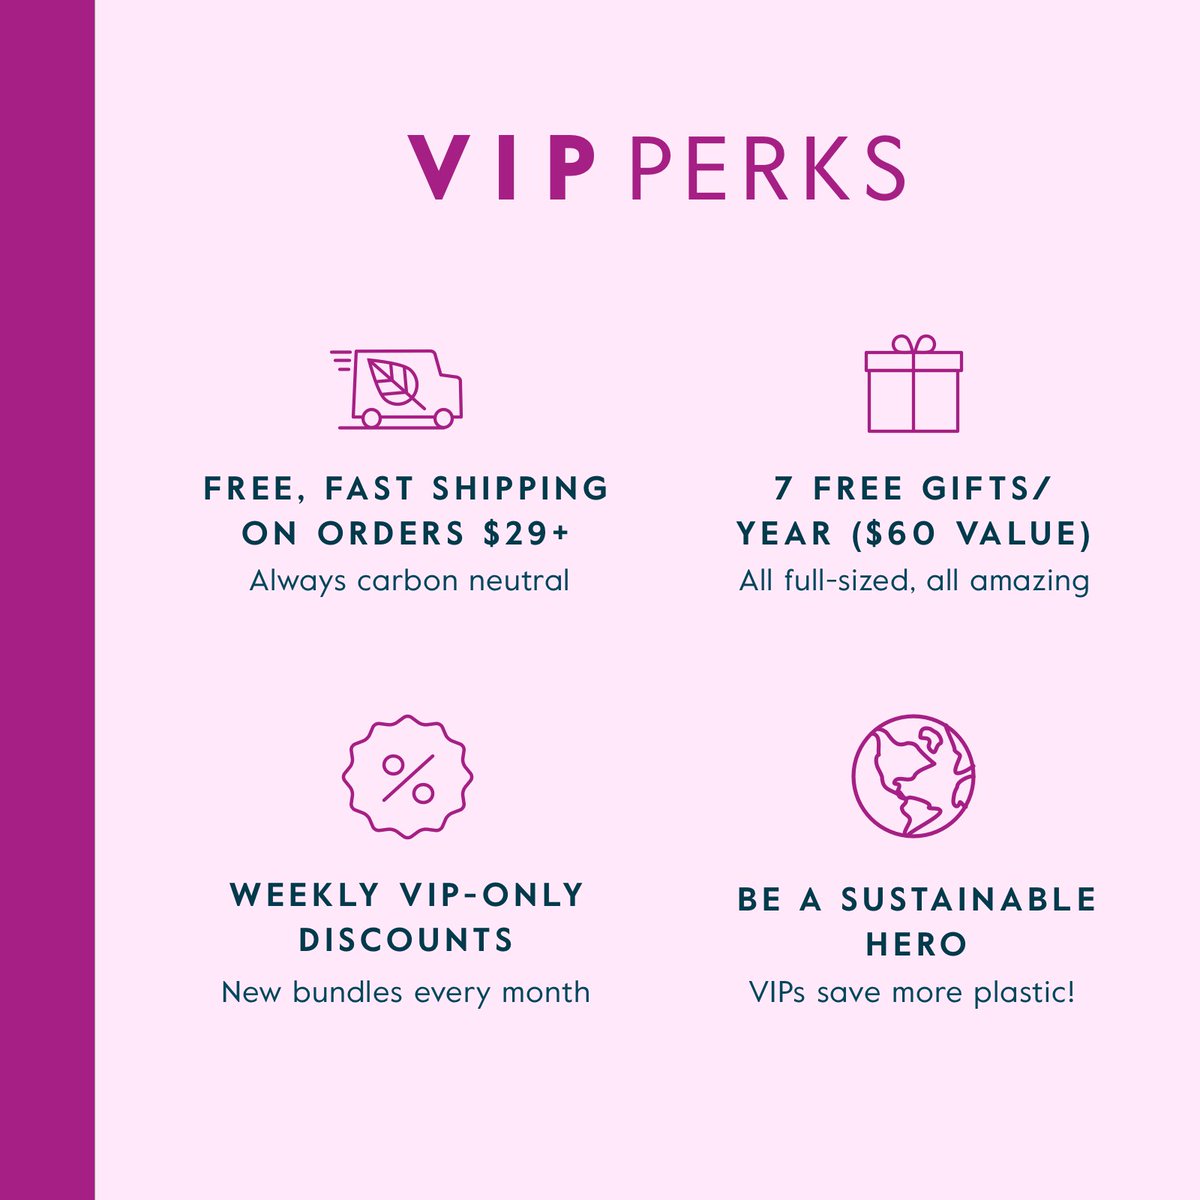 Want the VIP treatment? We're here to say that you *totally* deserve it. From free full-sized gifts to exclusive deals and sustainable hero status, there's a lot to love. Unlock it all when you become a Grove VIP. Tap the link to start your journey. 🔗 -> bit.ly/3qwKGB2